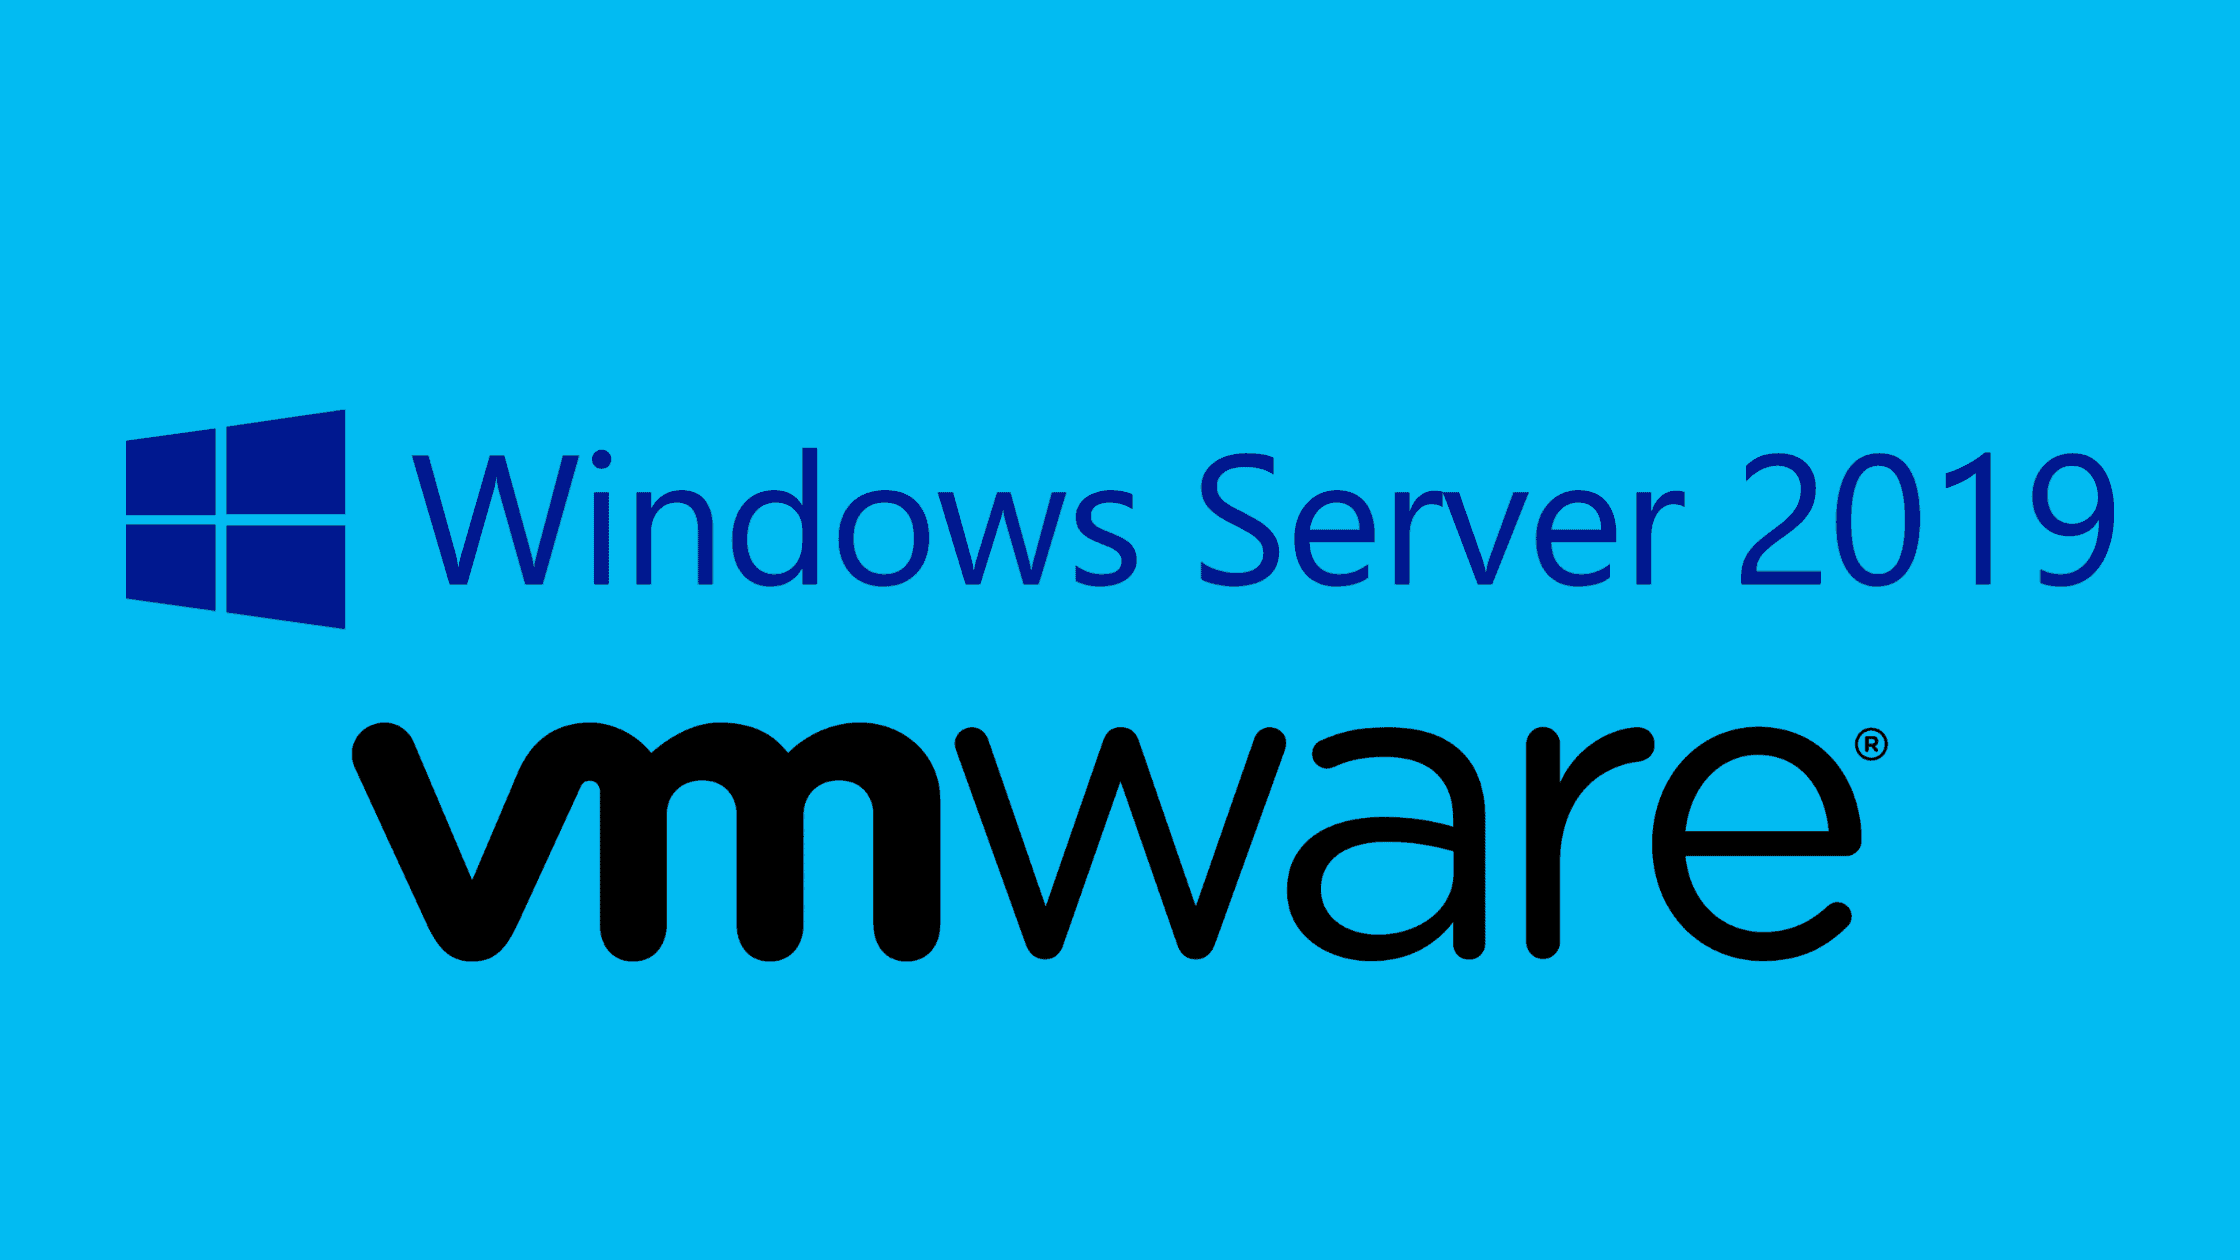 Step By Step Procedure To Install Windows Server 2019 On Vmware Workstation